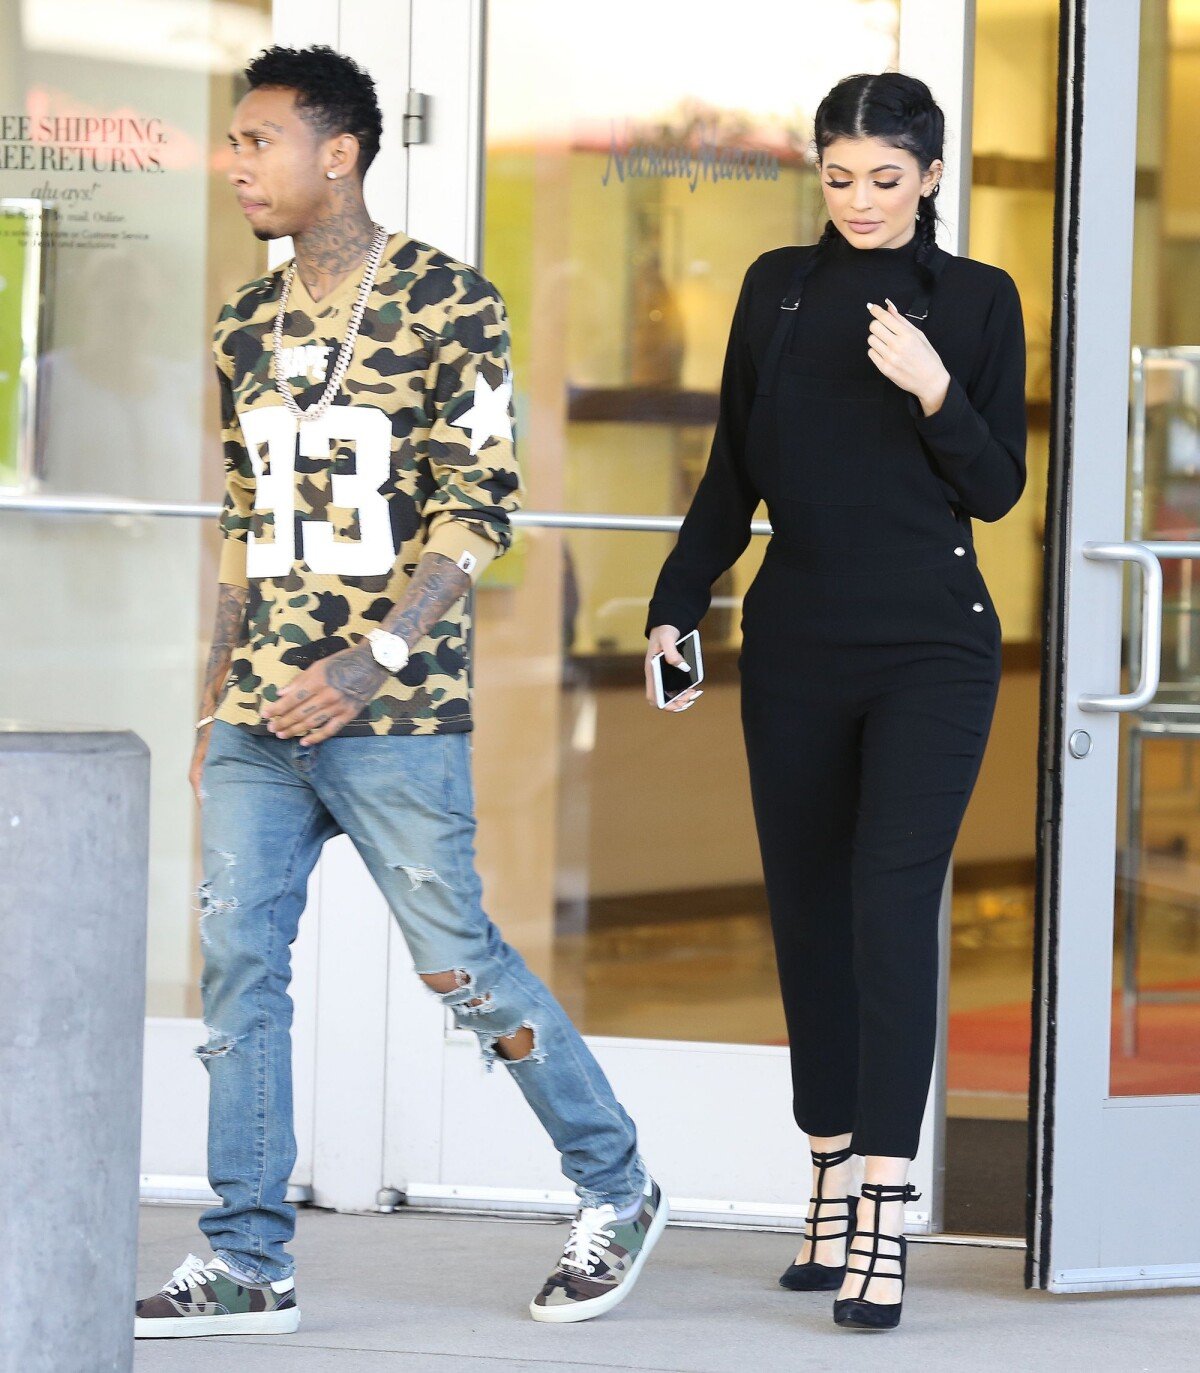 Kylie Jenner and Tyga at the Topanga Mall in Woodland Hills